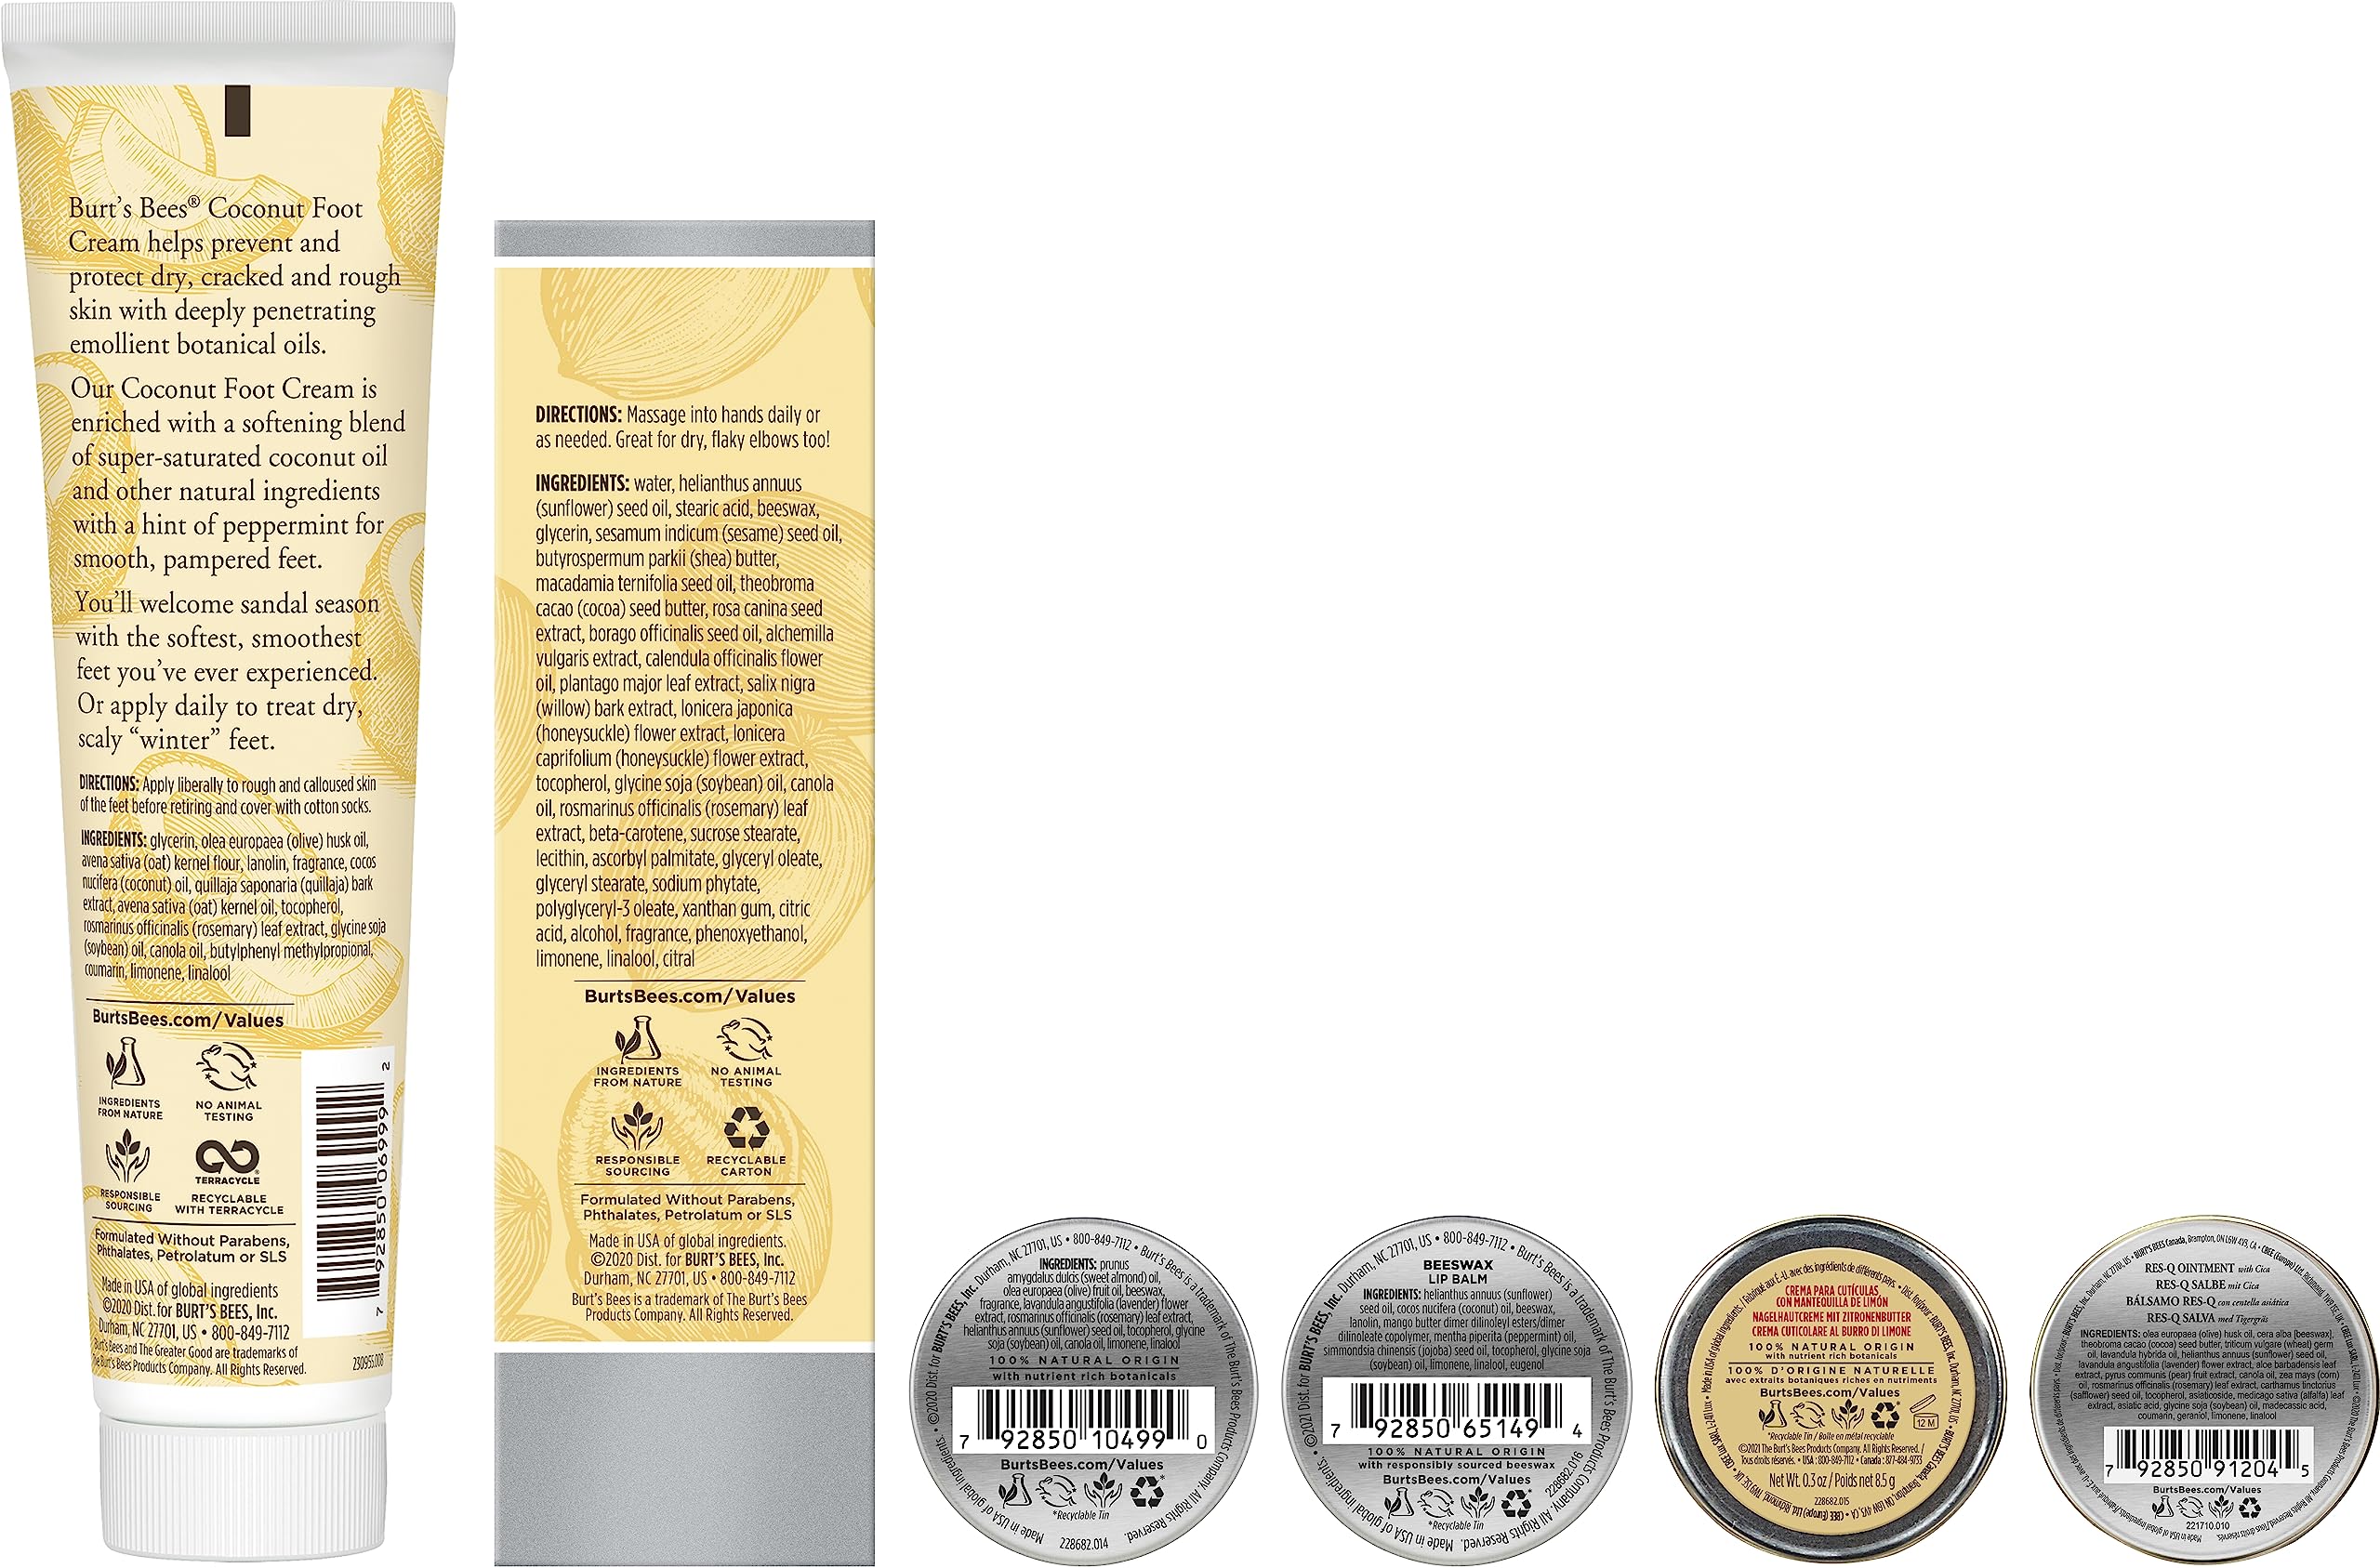 Burt's Bees Back to School Gifts, 6 Dorm Body Care Products for College Students, Classics Set -Original Beeswax Lip Balm, Cuticle Cream, Hand Salve, Res-Q Ointment, Hand Repair Cream & Foot Cream